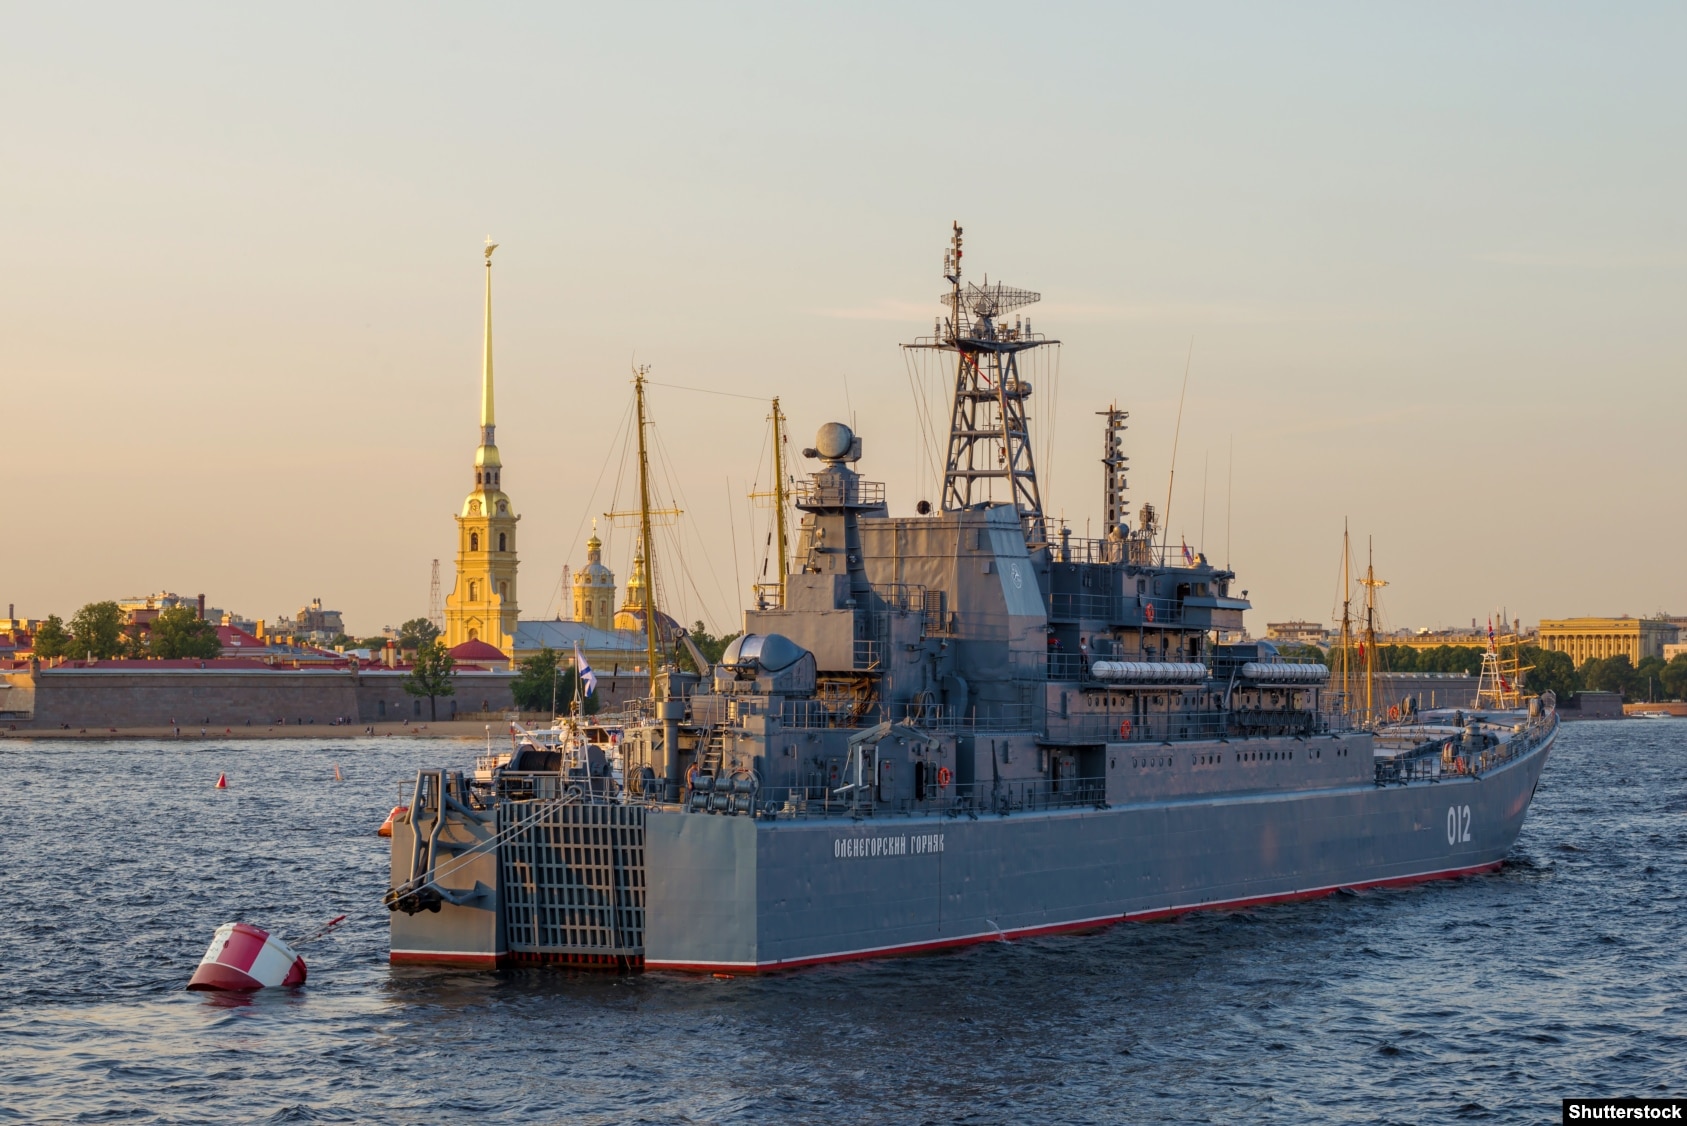 The Ropucha-class Olenegorsky Gornyak landing craft on St. Petersburg&rsquo;s Neva River in July 2021 &nbsp; In August 2023, videos released show a marine drone impacting the landing craft in the Russian port of Novorossiisk. The ship suffered &quot;severe damage&quot; in the attack, according to the British Defense Ministry, and videos later emerged showing the vessel listing heavily under tow The Polish-made vessel is from the same Ropucha class as the Minsk that was apparently destroyed in September. 